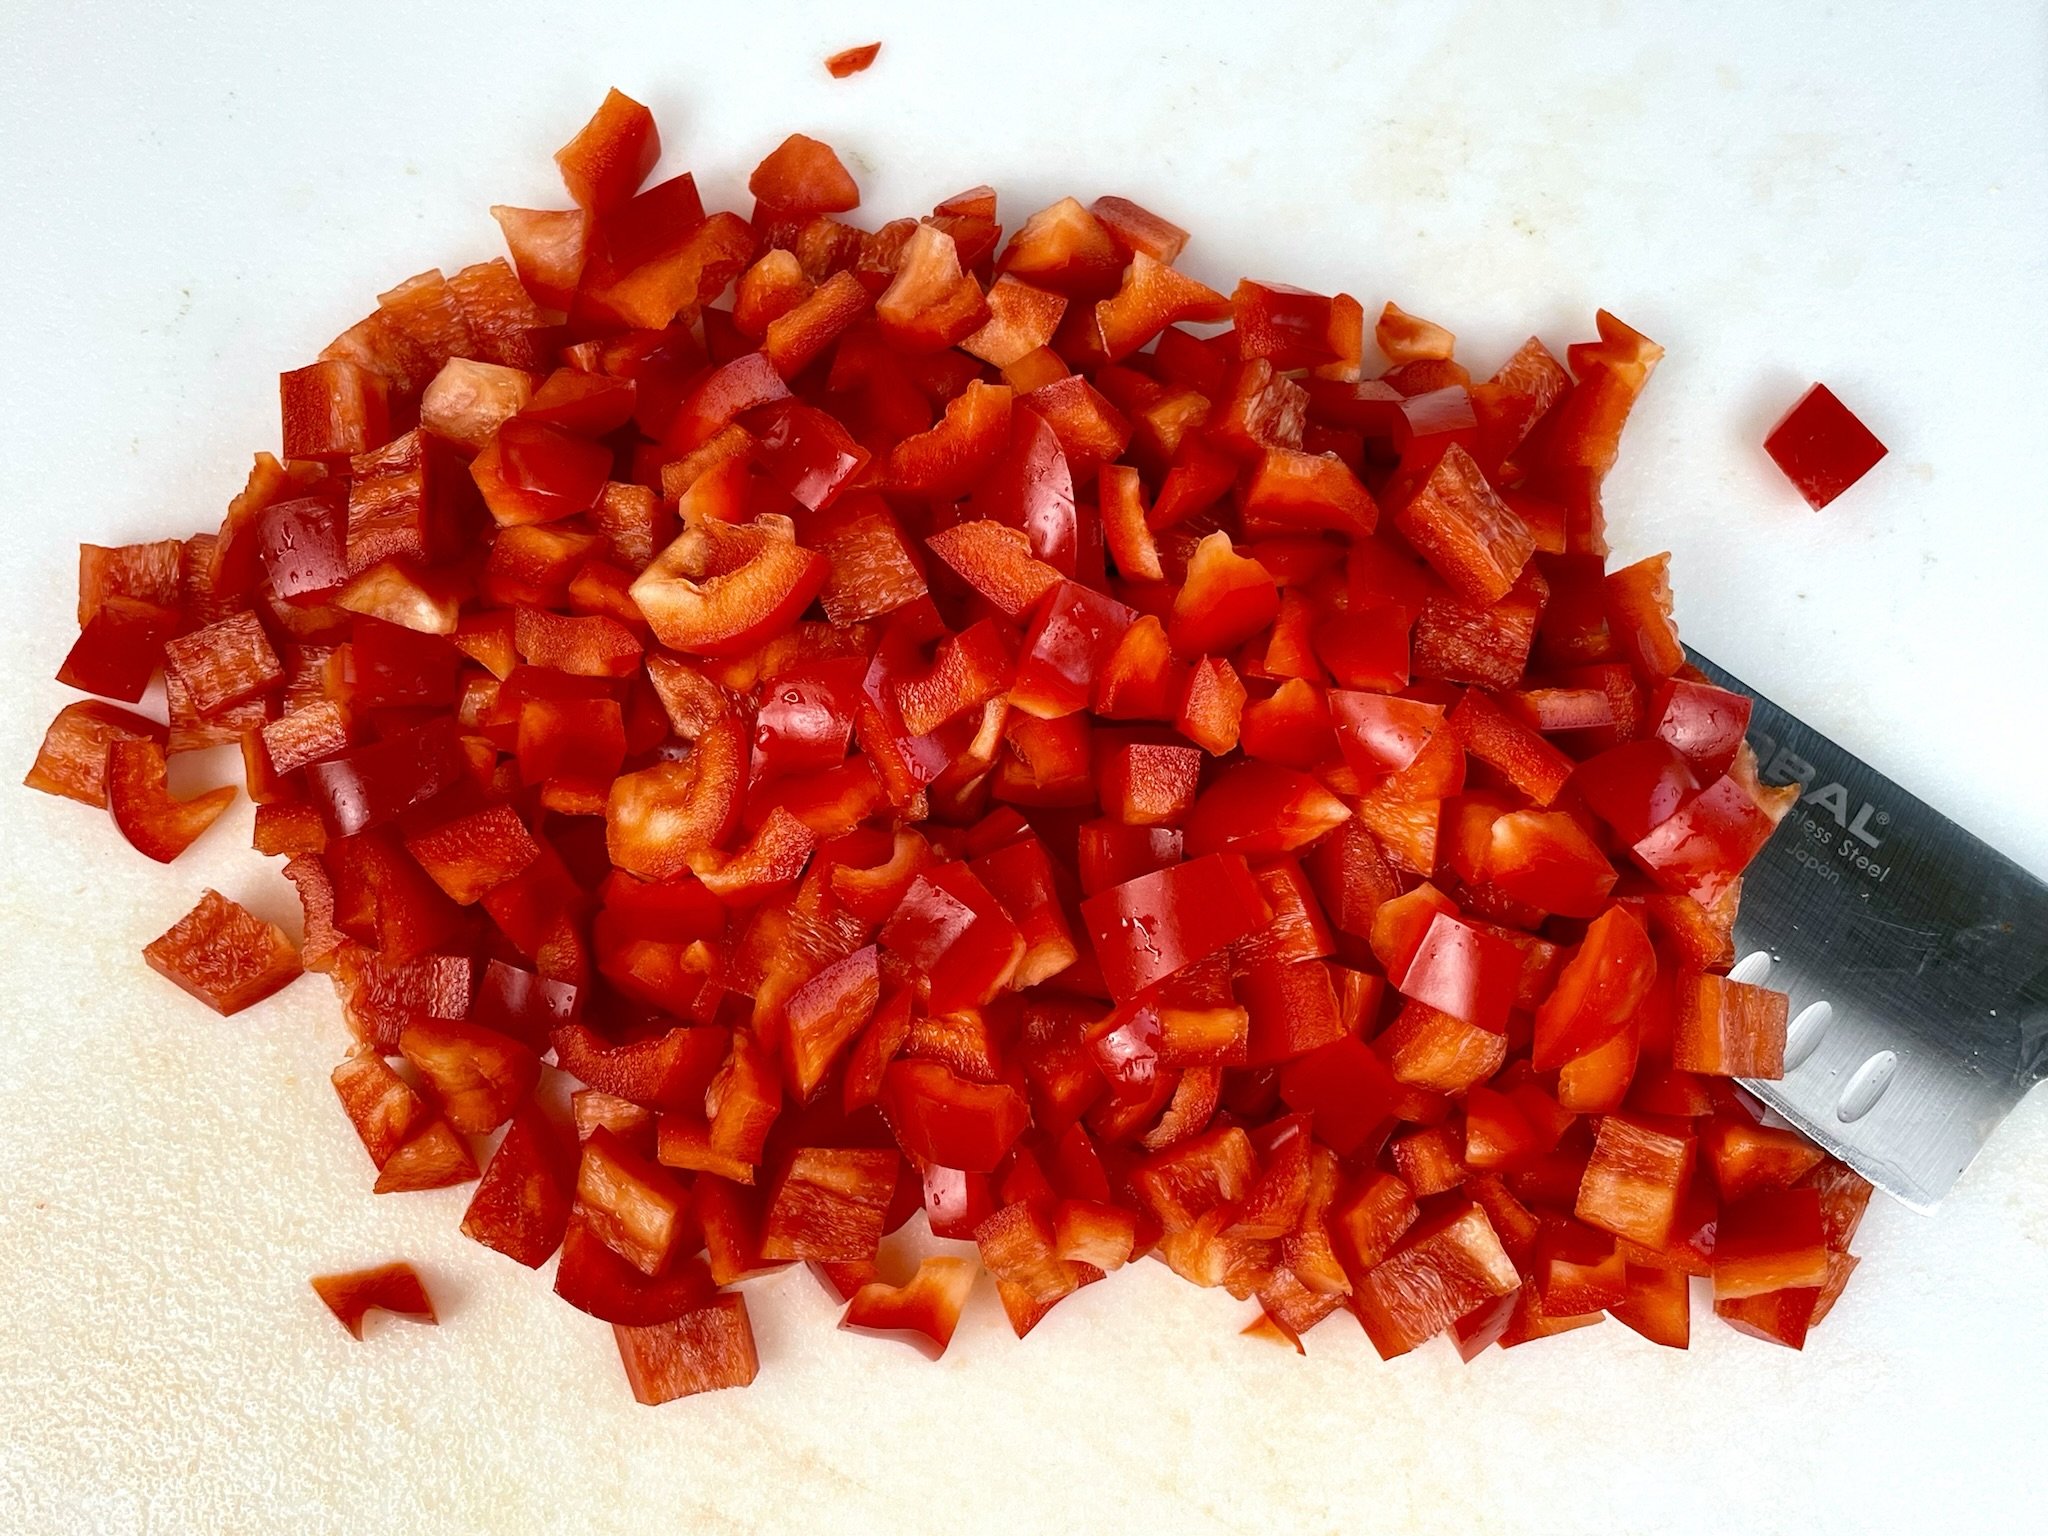 Diced red bell peppers.